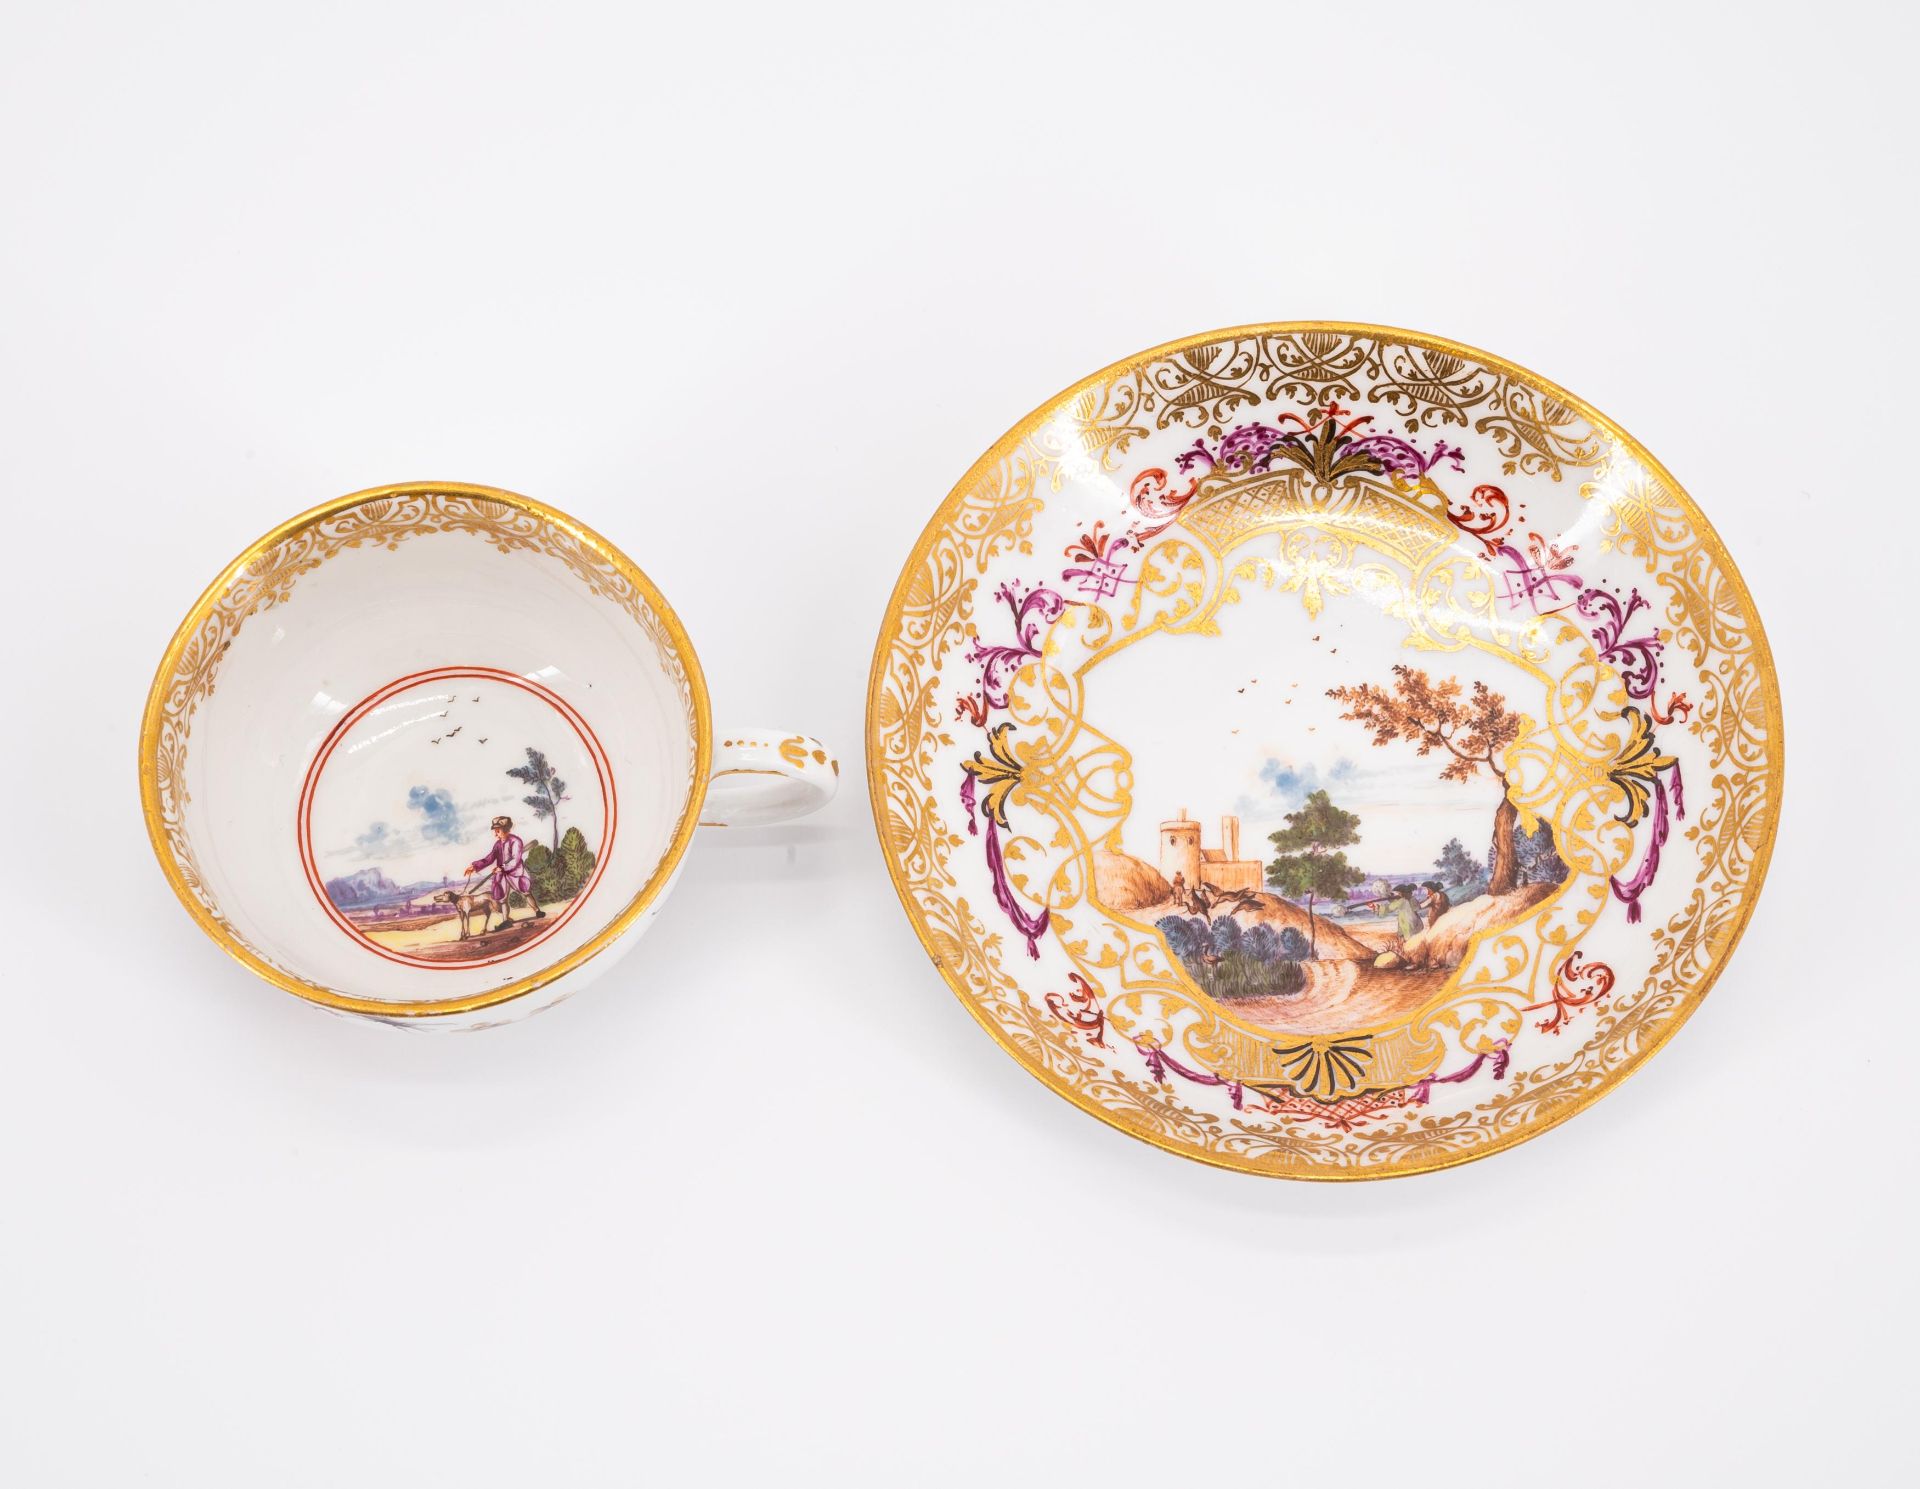 Meissen: CUP AND SAUCER WITH LARGE GOLD CARTOUCHES AND HUNTING SCENES - Image 5 of 6